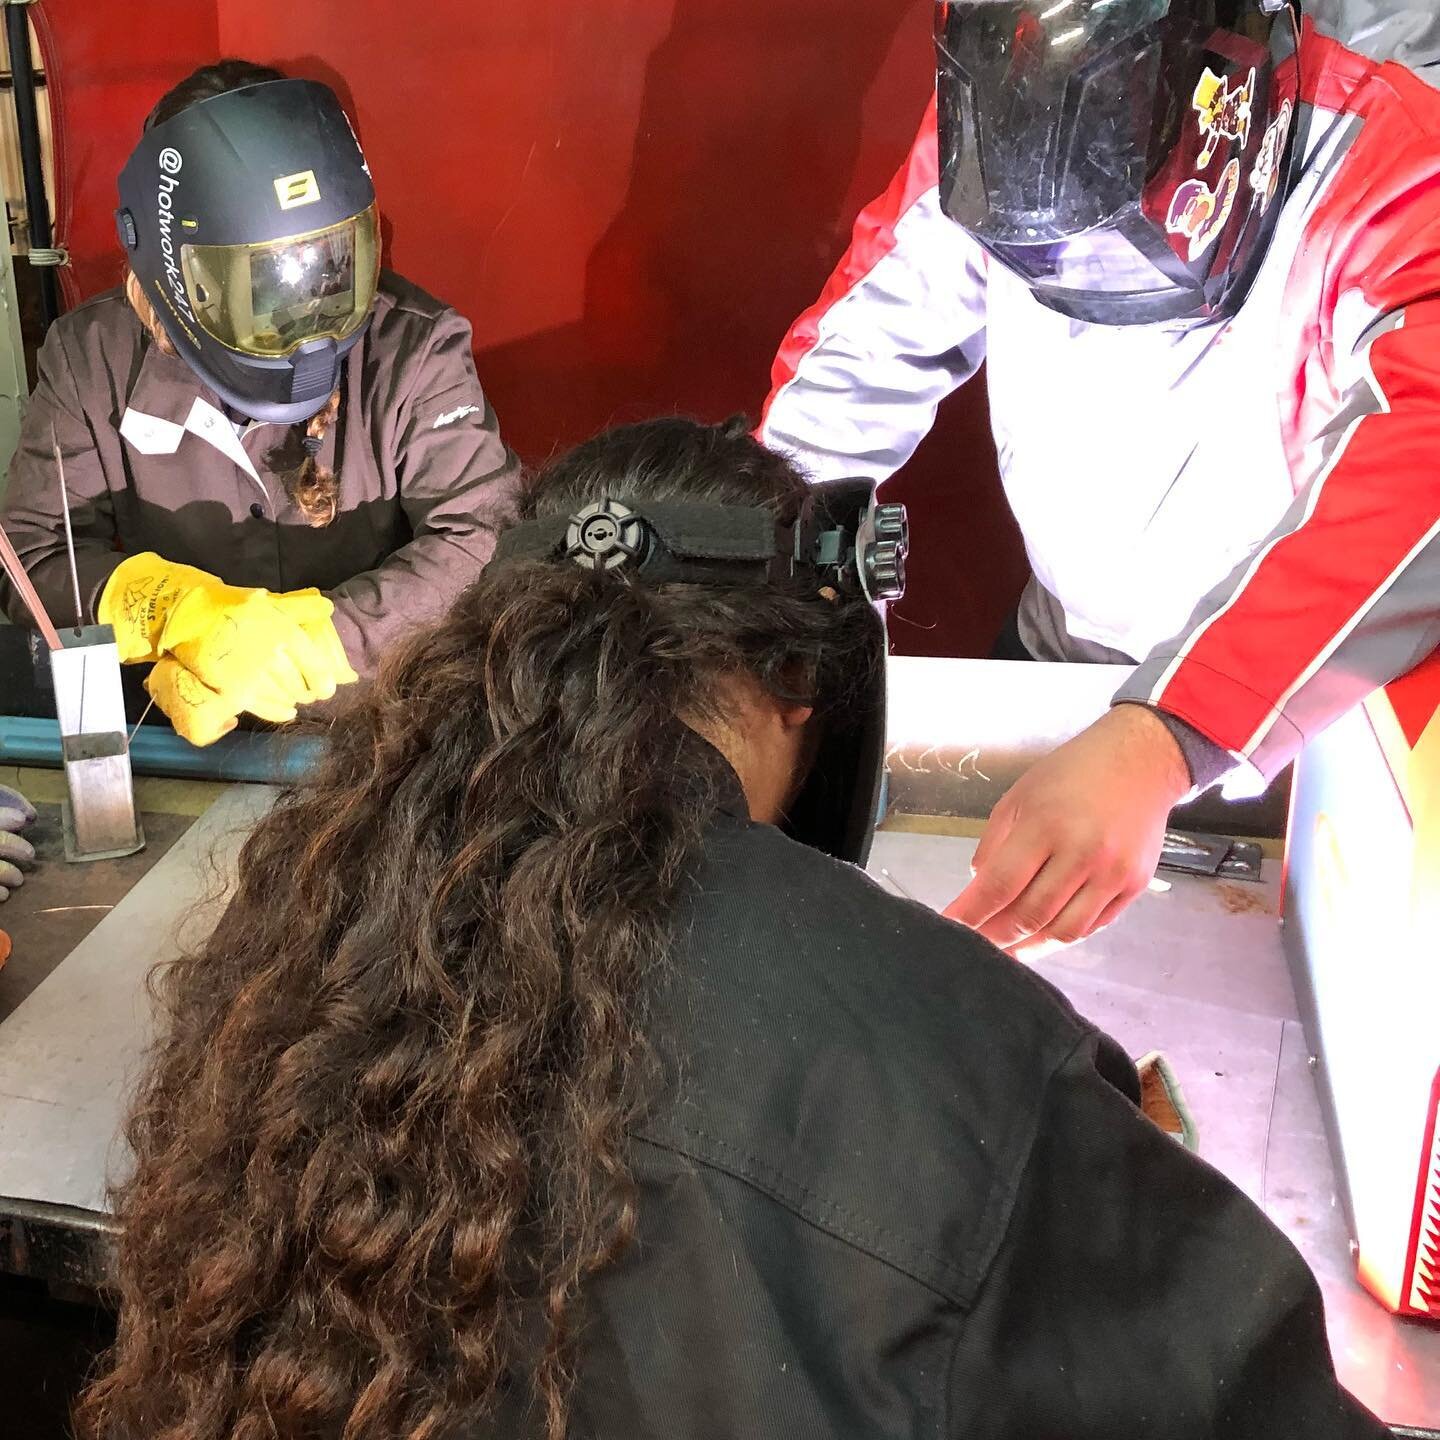 Our latest Arclight interview with Denise, a body quality technician at Rivian (@rivianofficial) in Normal, IL, is live! Denise completed Women Who Weld&rsquo;s Intensive Welding Training Program in August 2021.

Below is an excerpt from the intervie